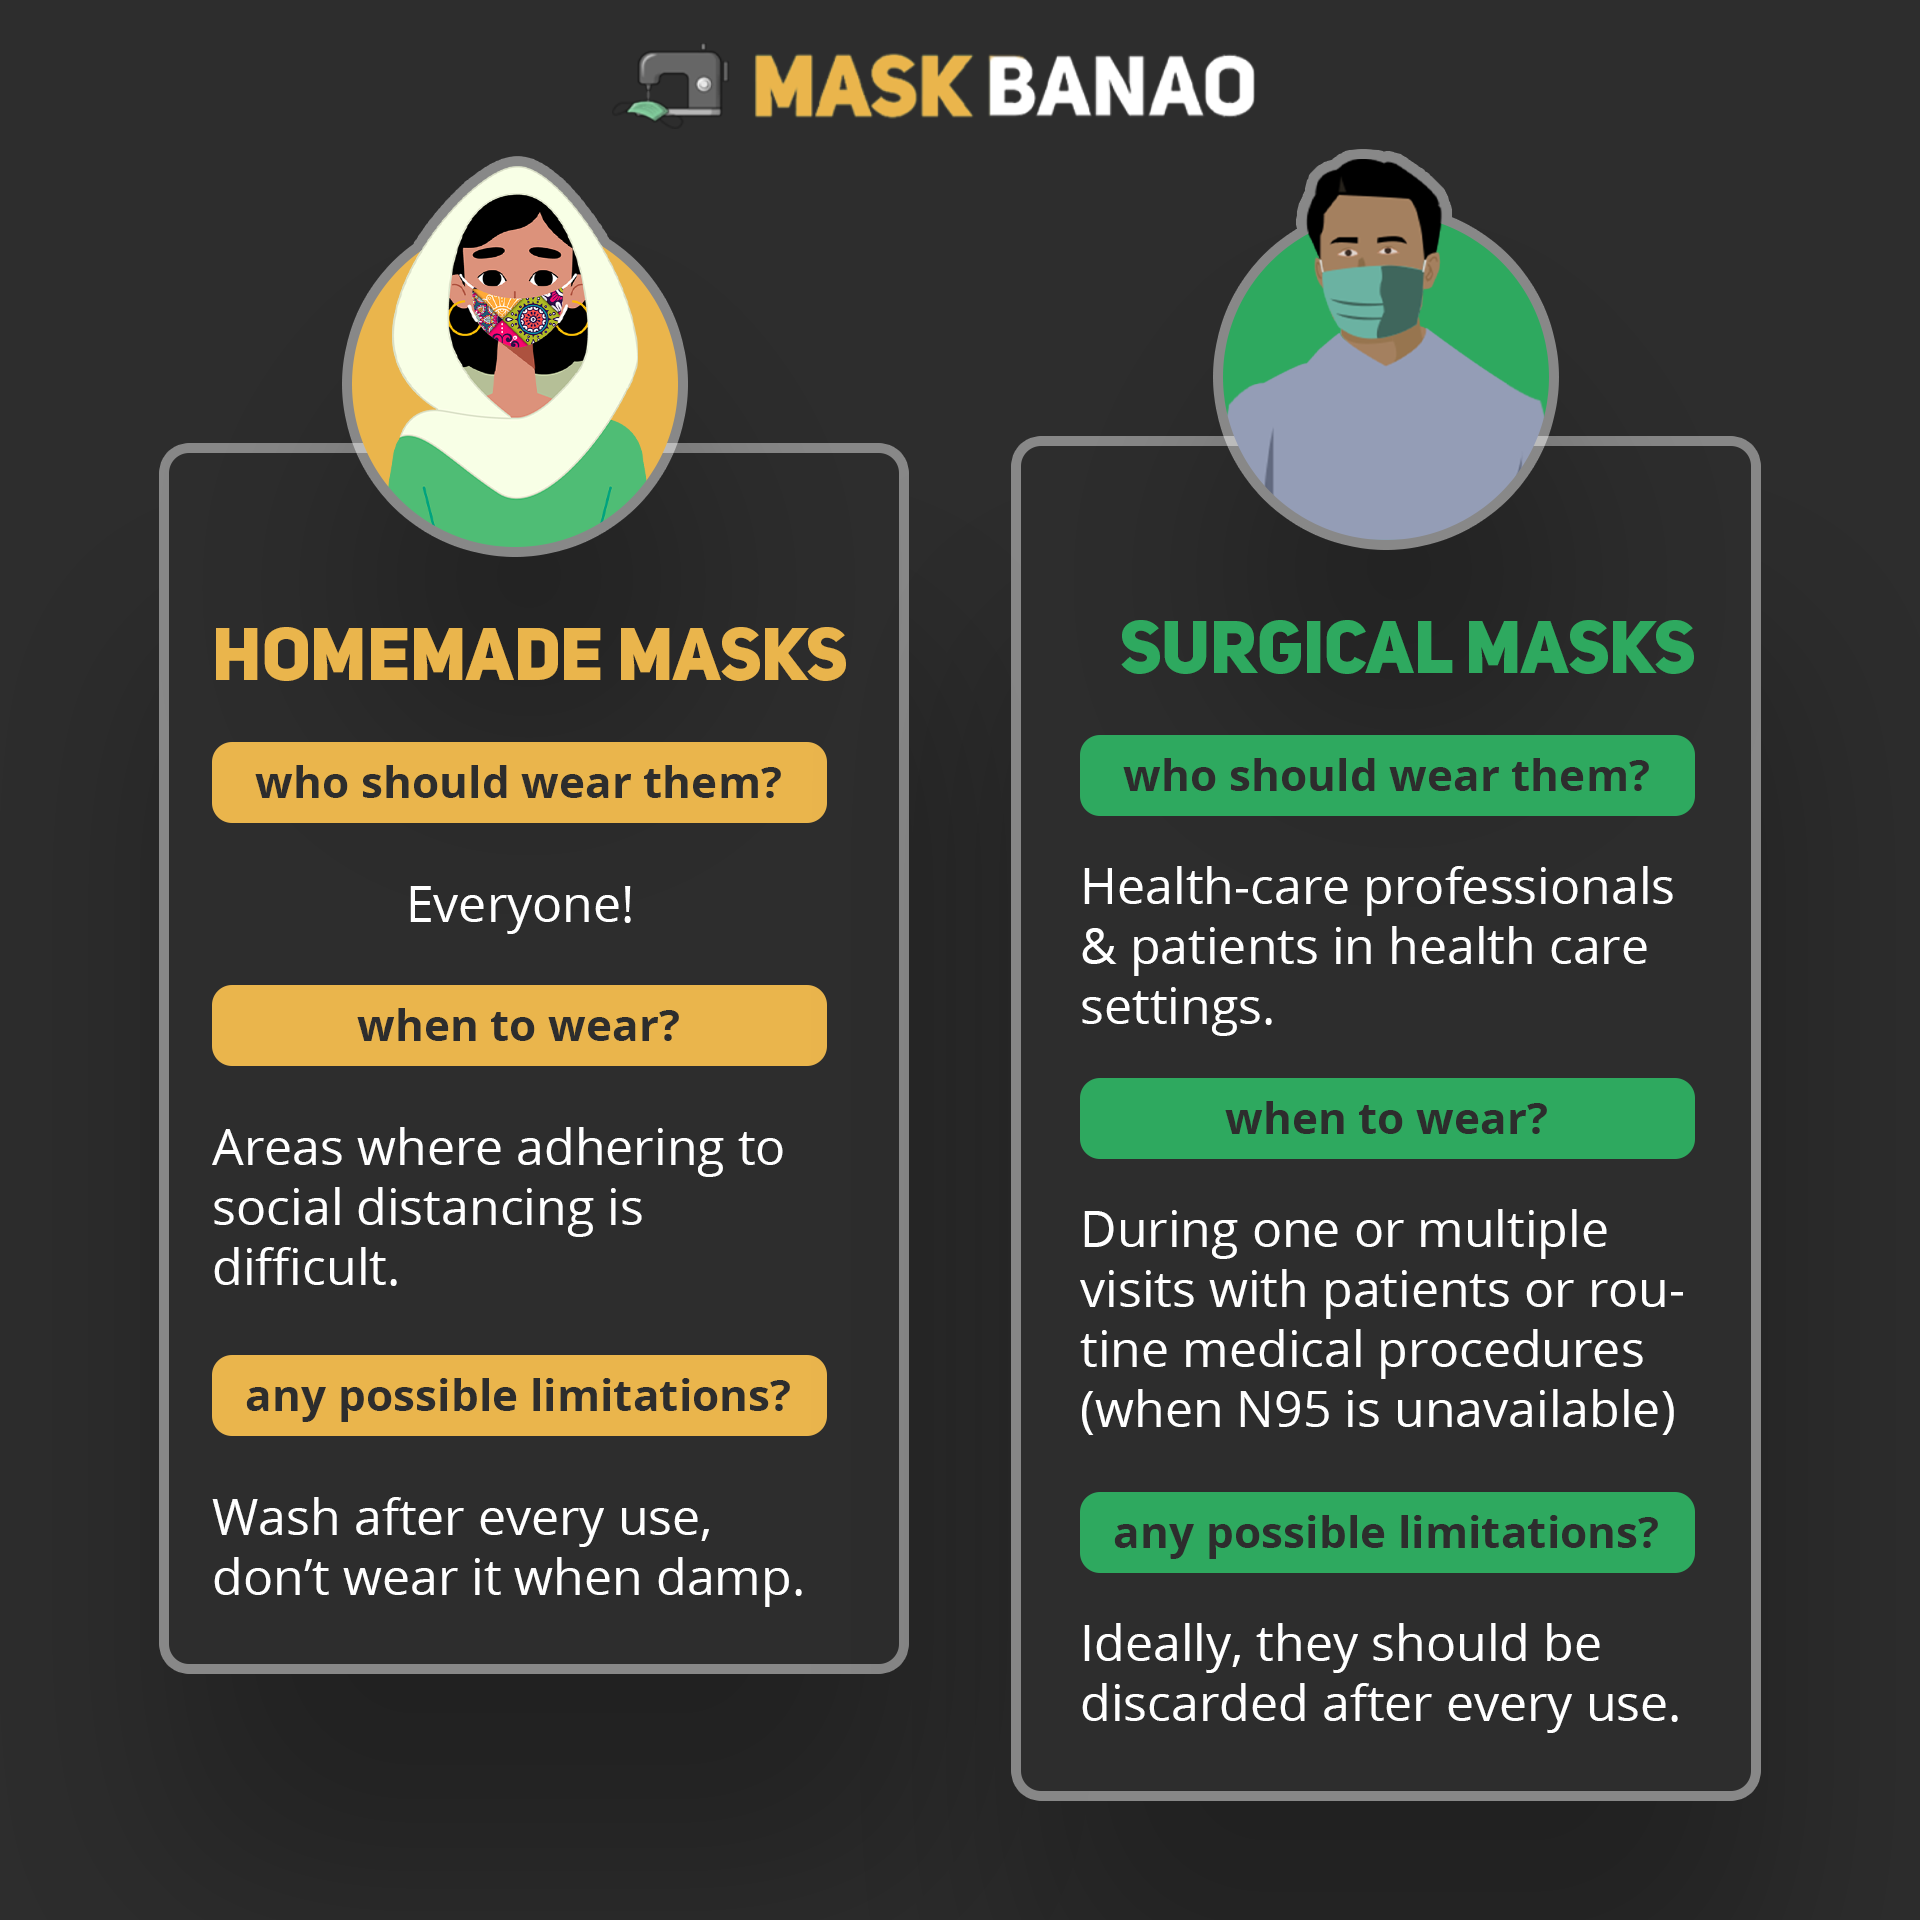 Comparison of homemade and surgical masks